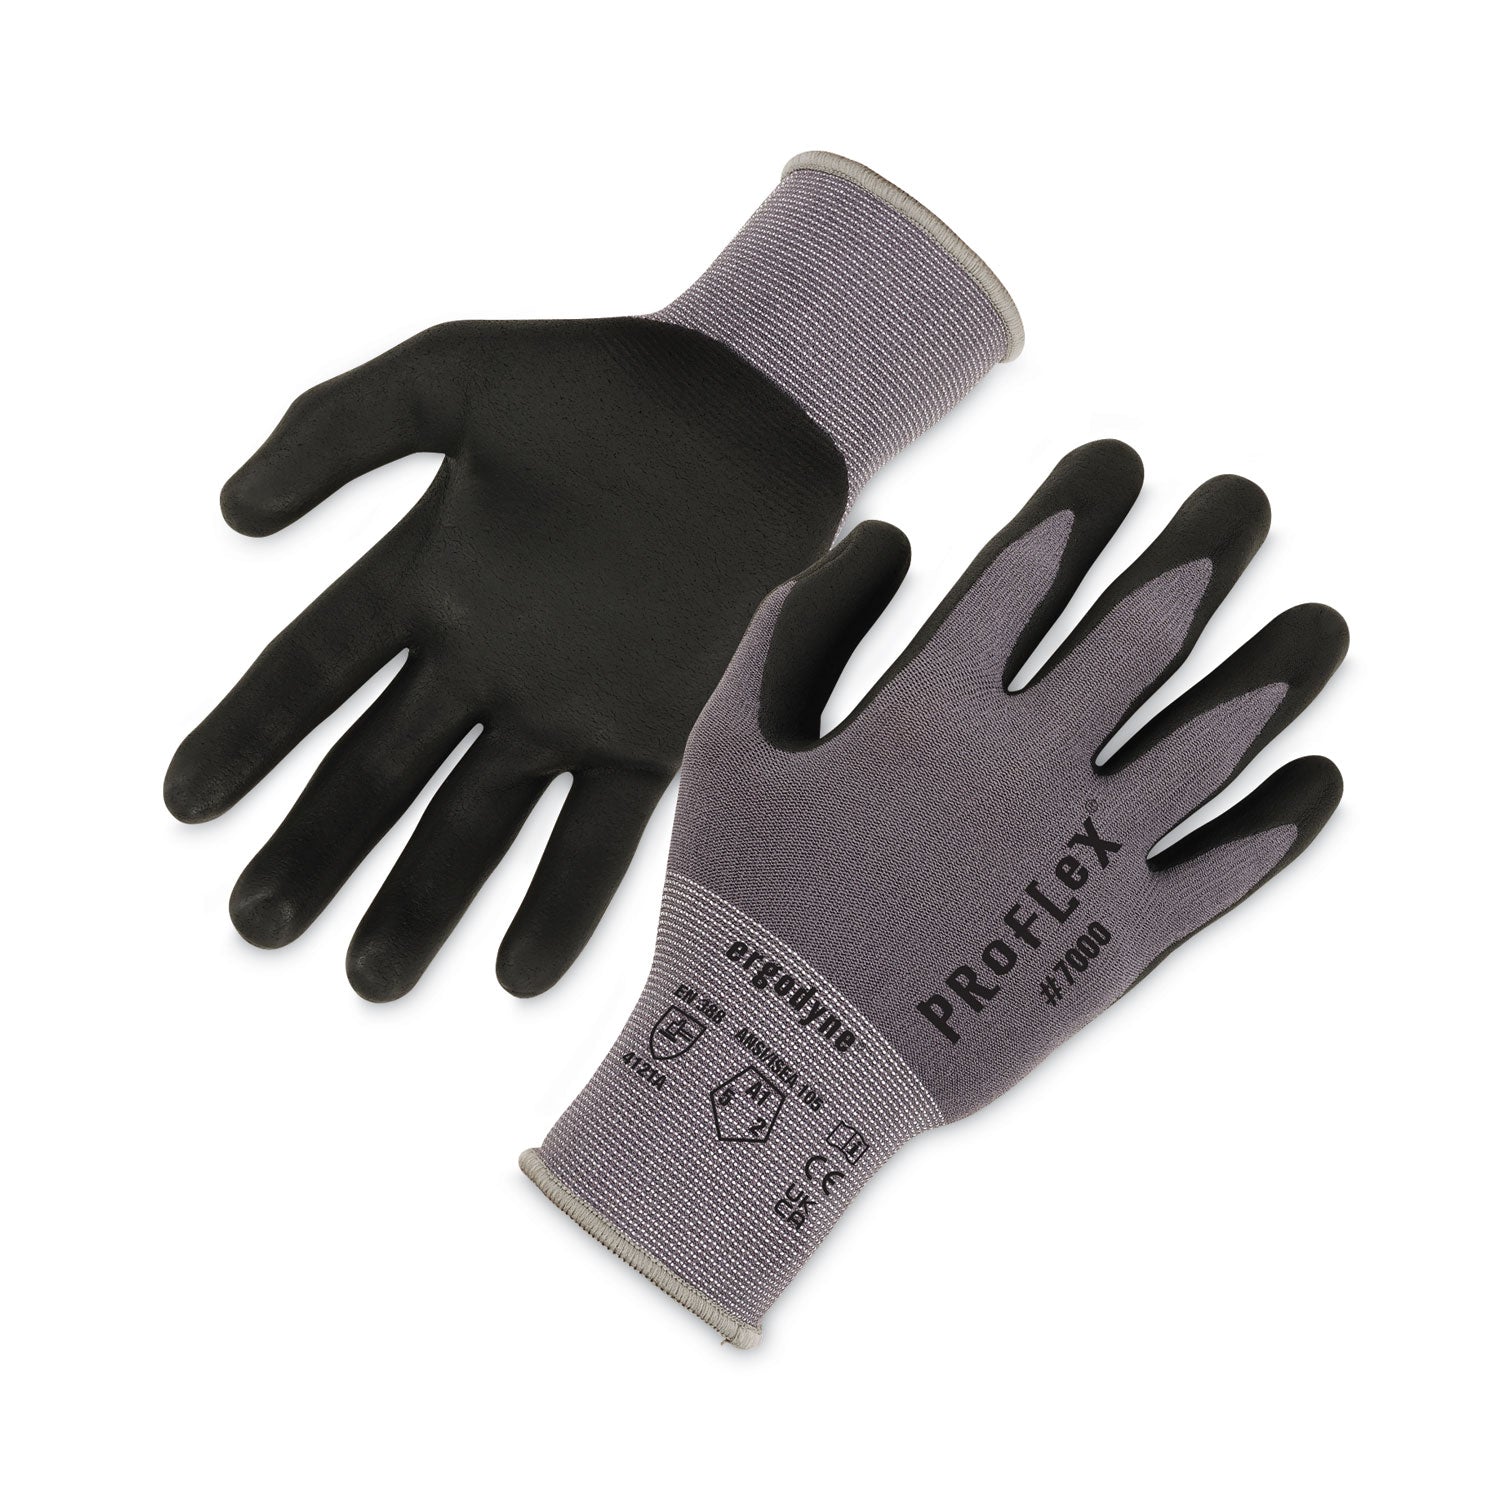 proflex-7000-nitrile-coated-gloves-microfoam-palm-gray-medium-pair-ships-in-1-3-business-days_ego10373 - 1